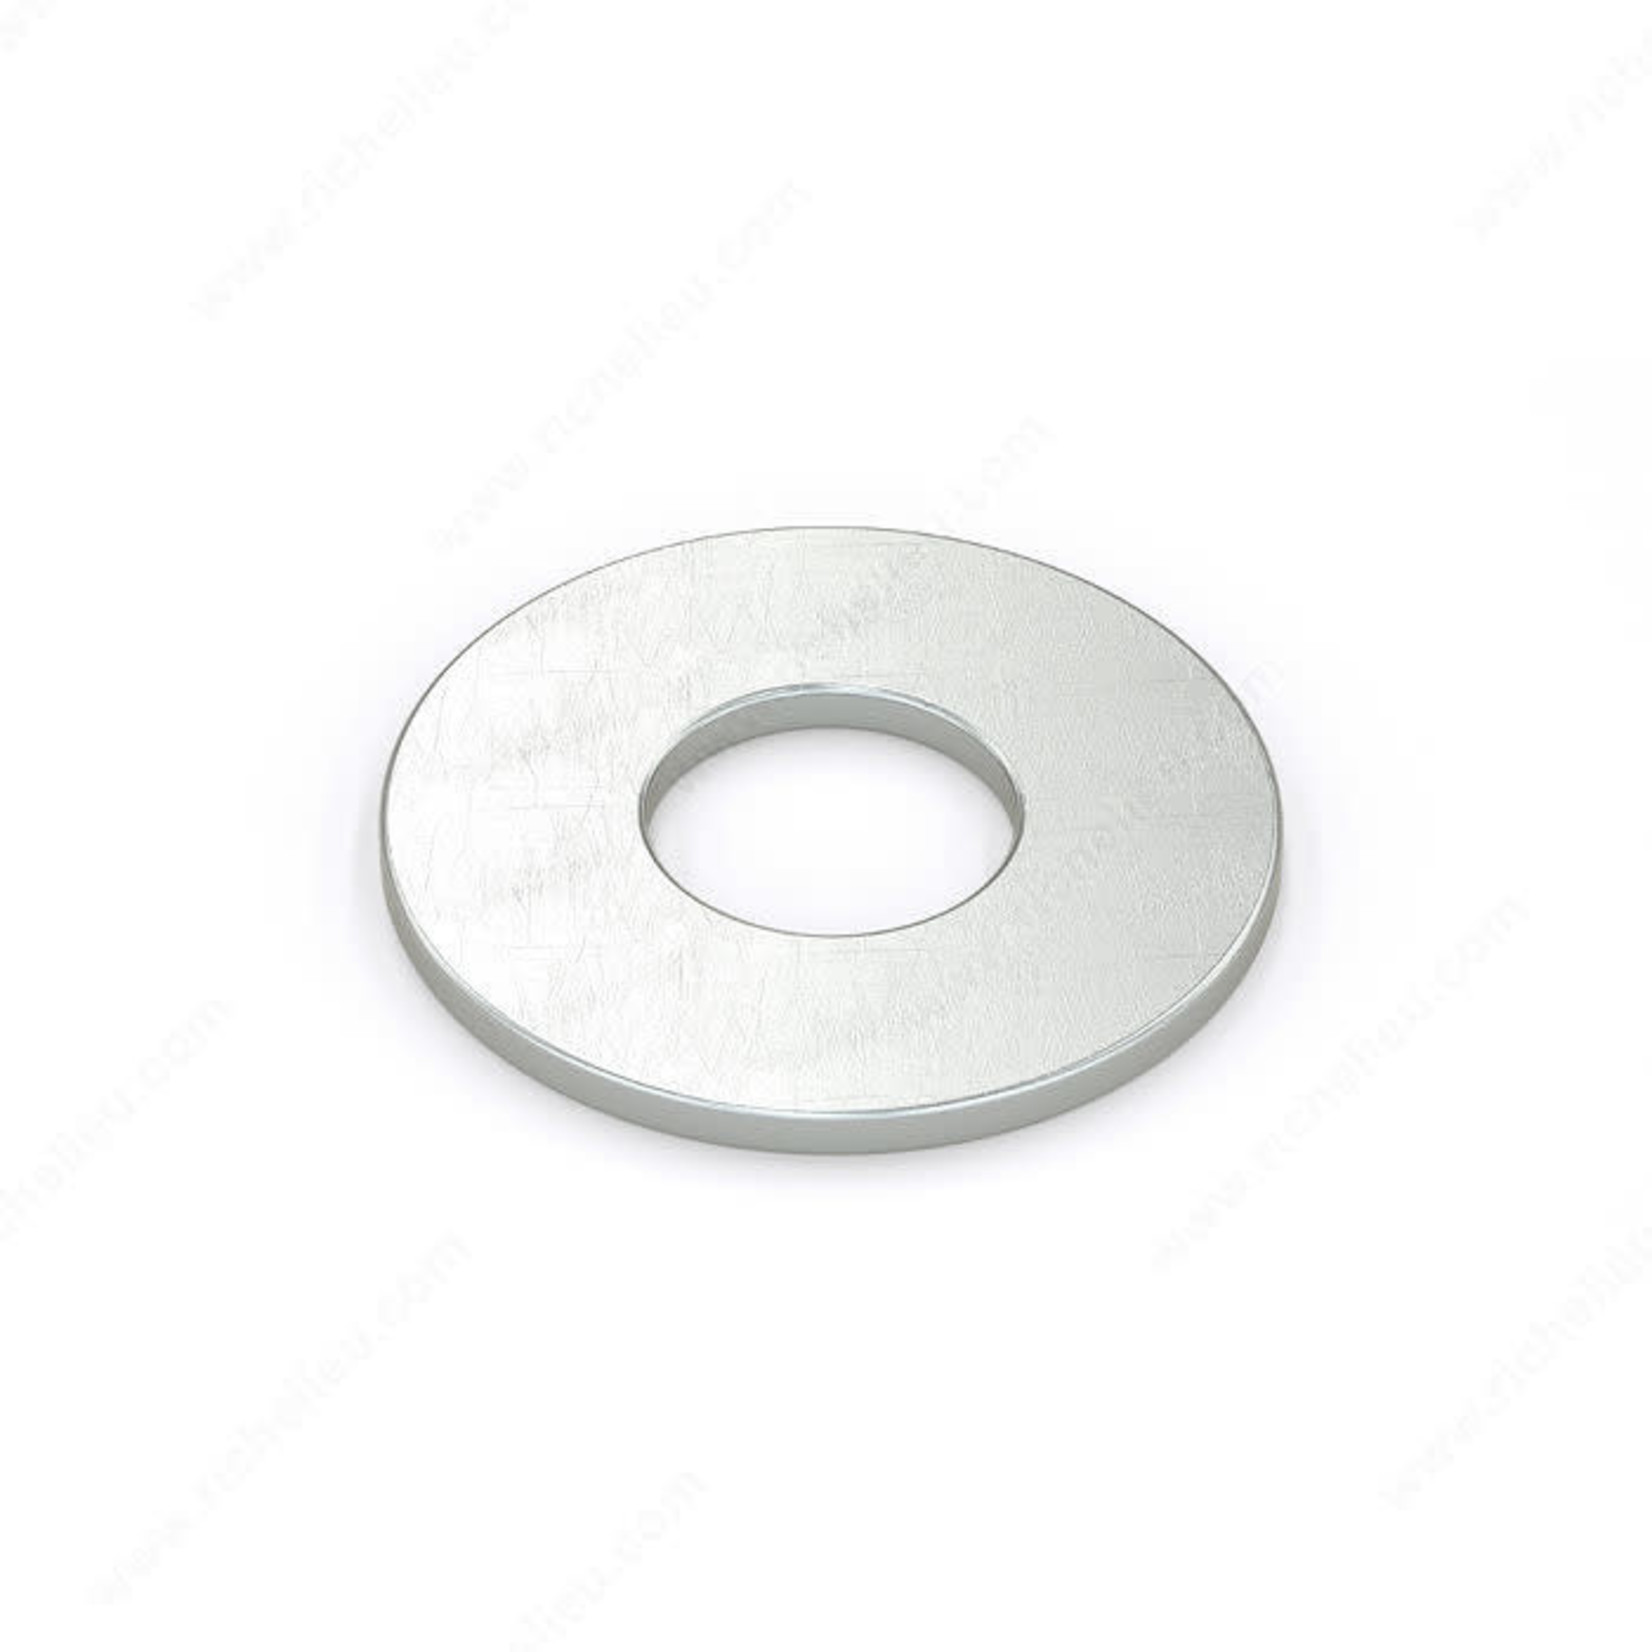 RELIABLE FLAT WASHER 1/4IN, 100PK